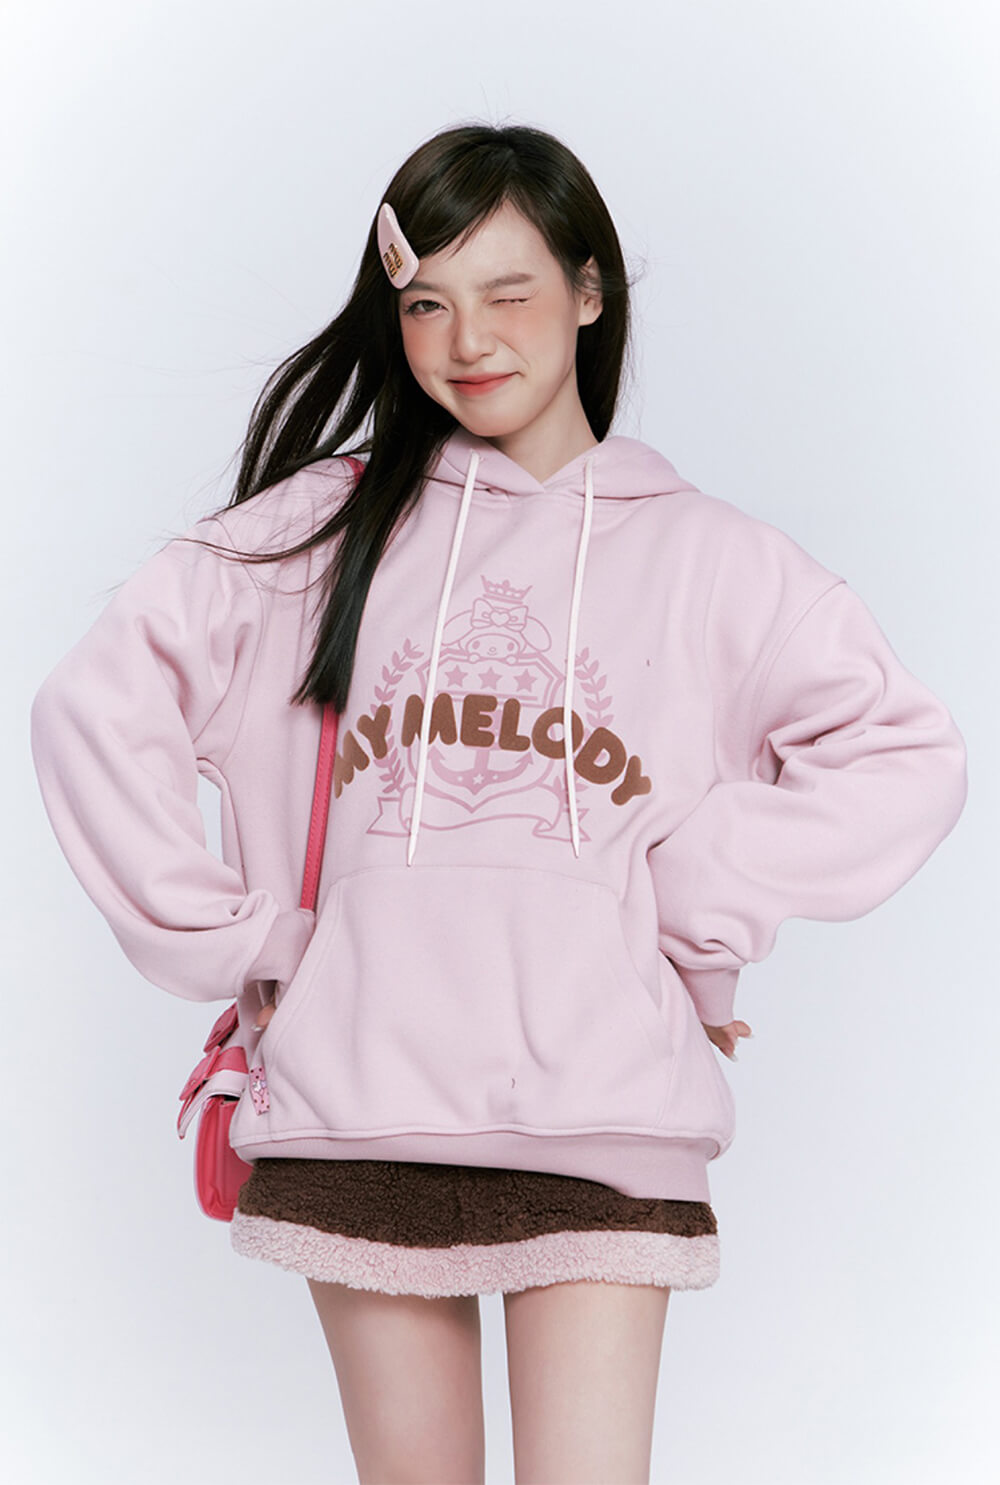 kawaii-cute-my-melody-preppy-look-styled-by-my-melody-pink-hoodie-and-my-melody-mini-skirt